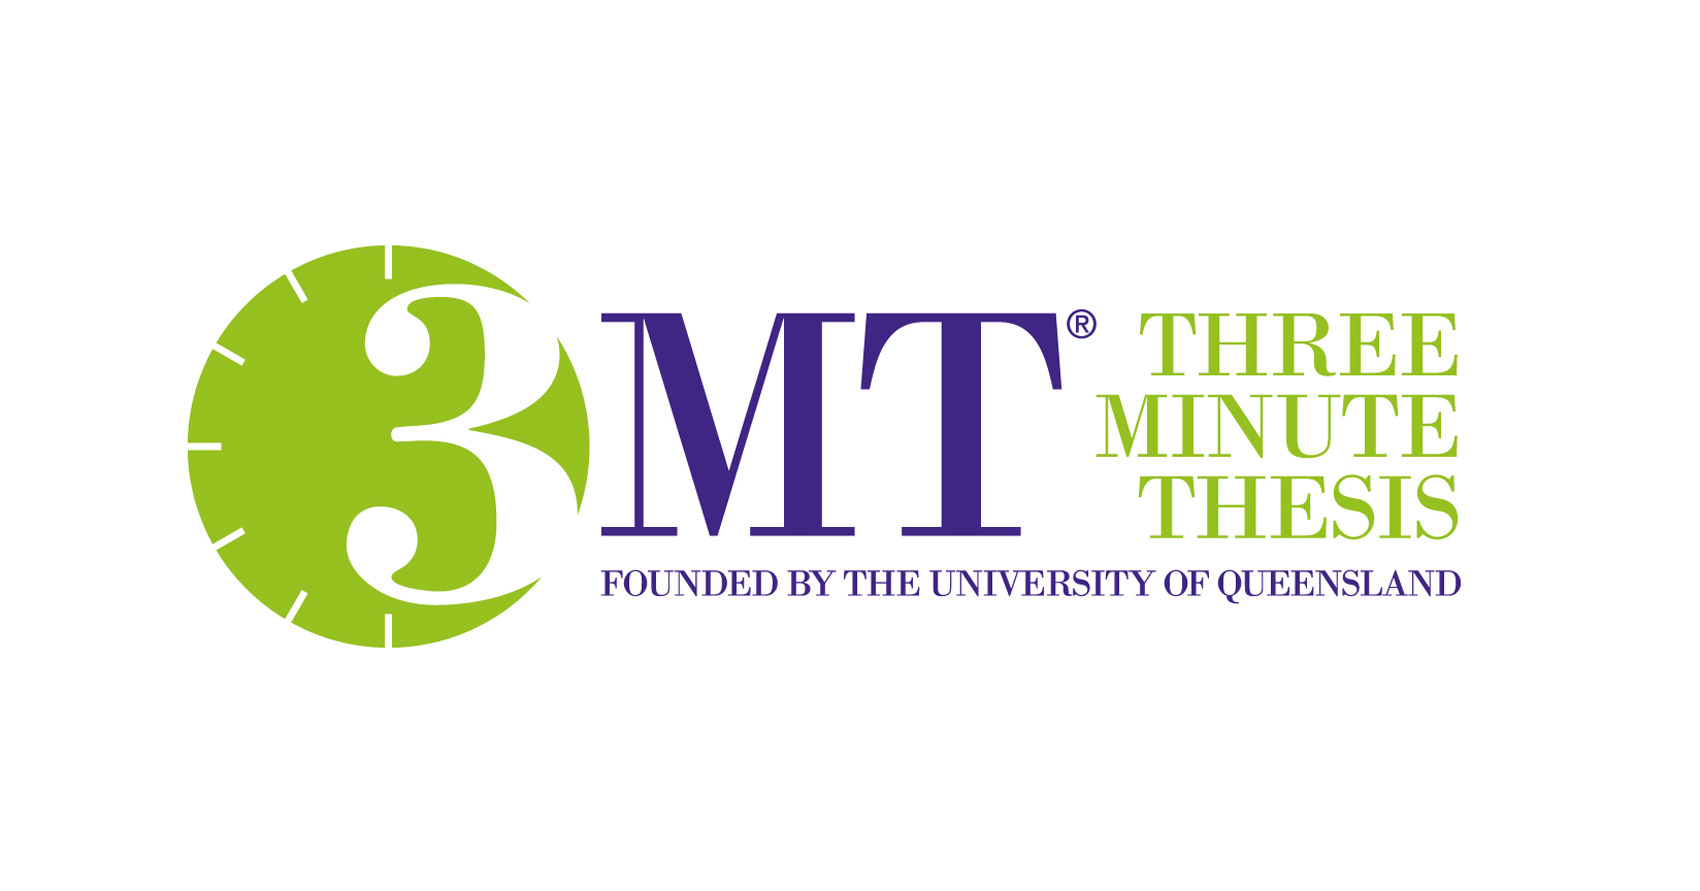 Image of the 3 Minute Thesis logo.